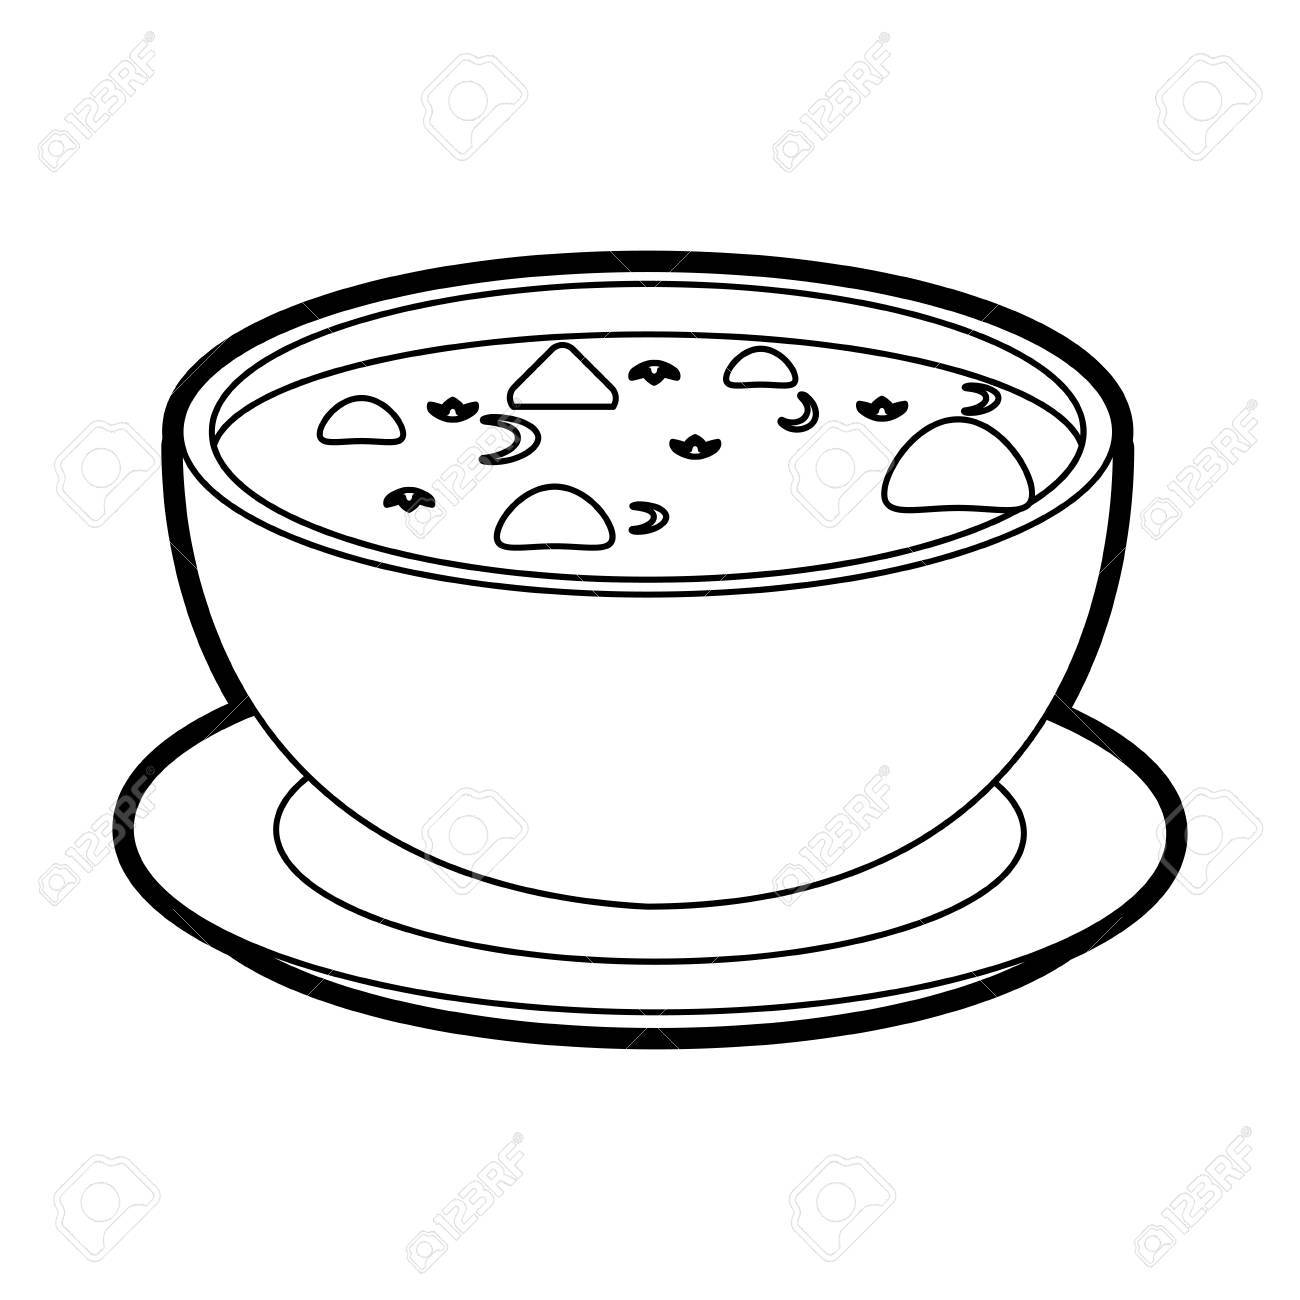 bowl clipart black and white